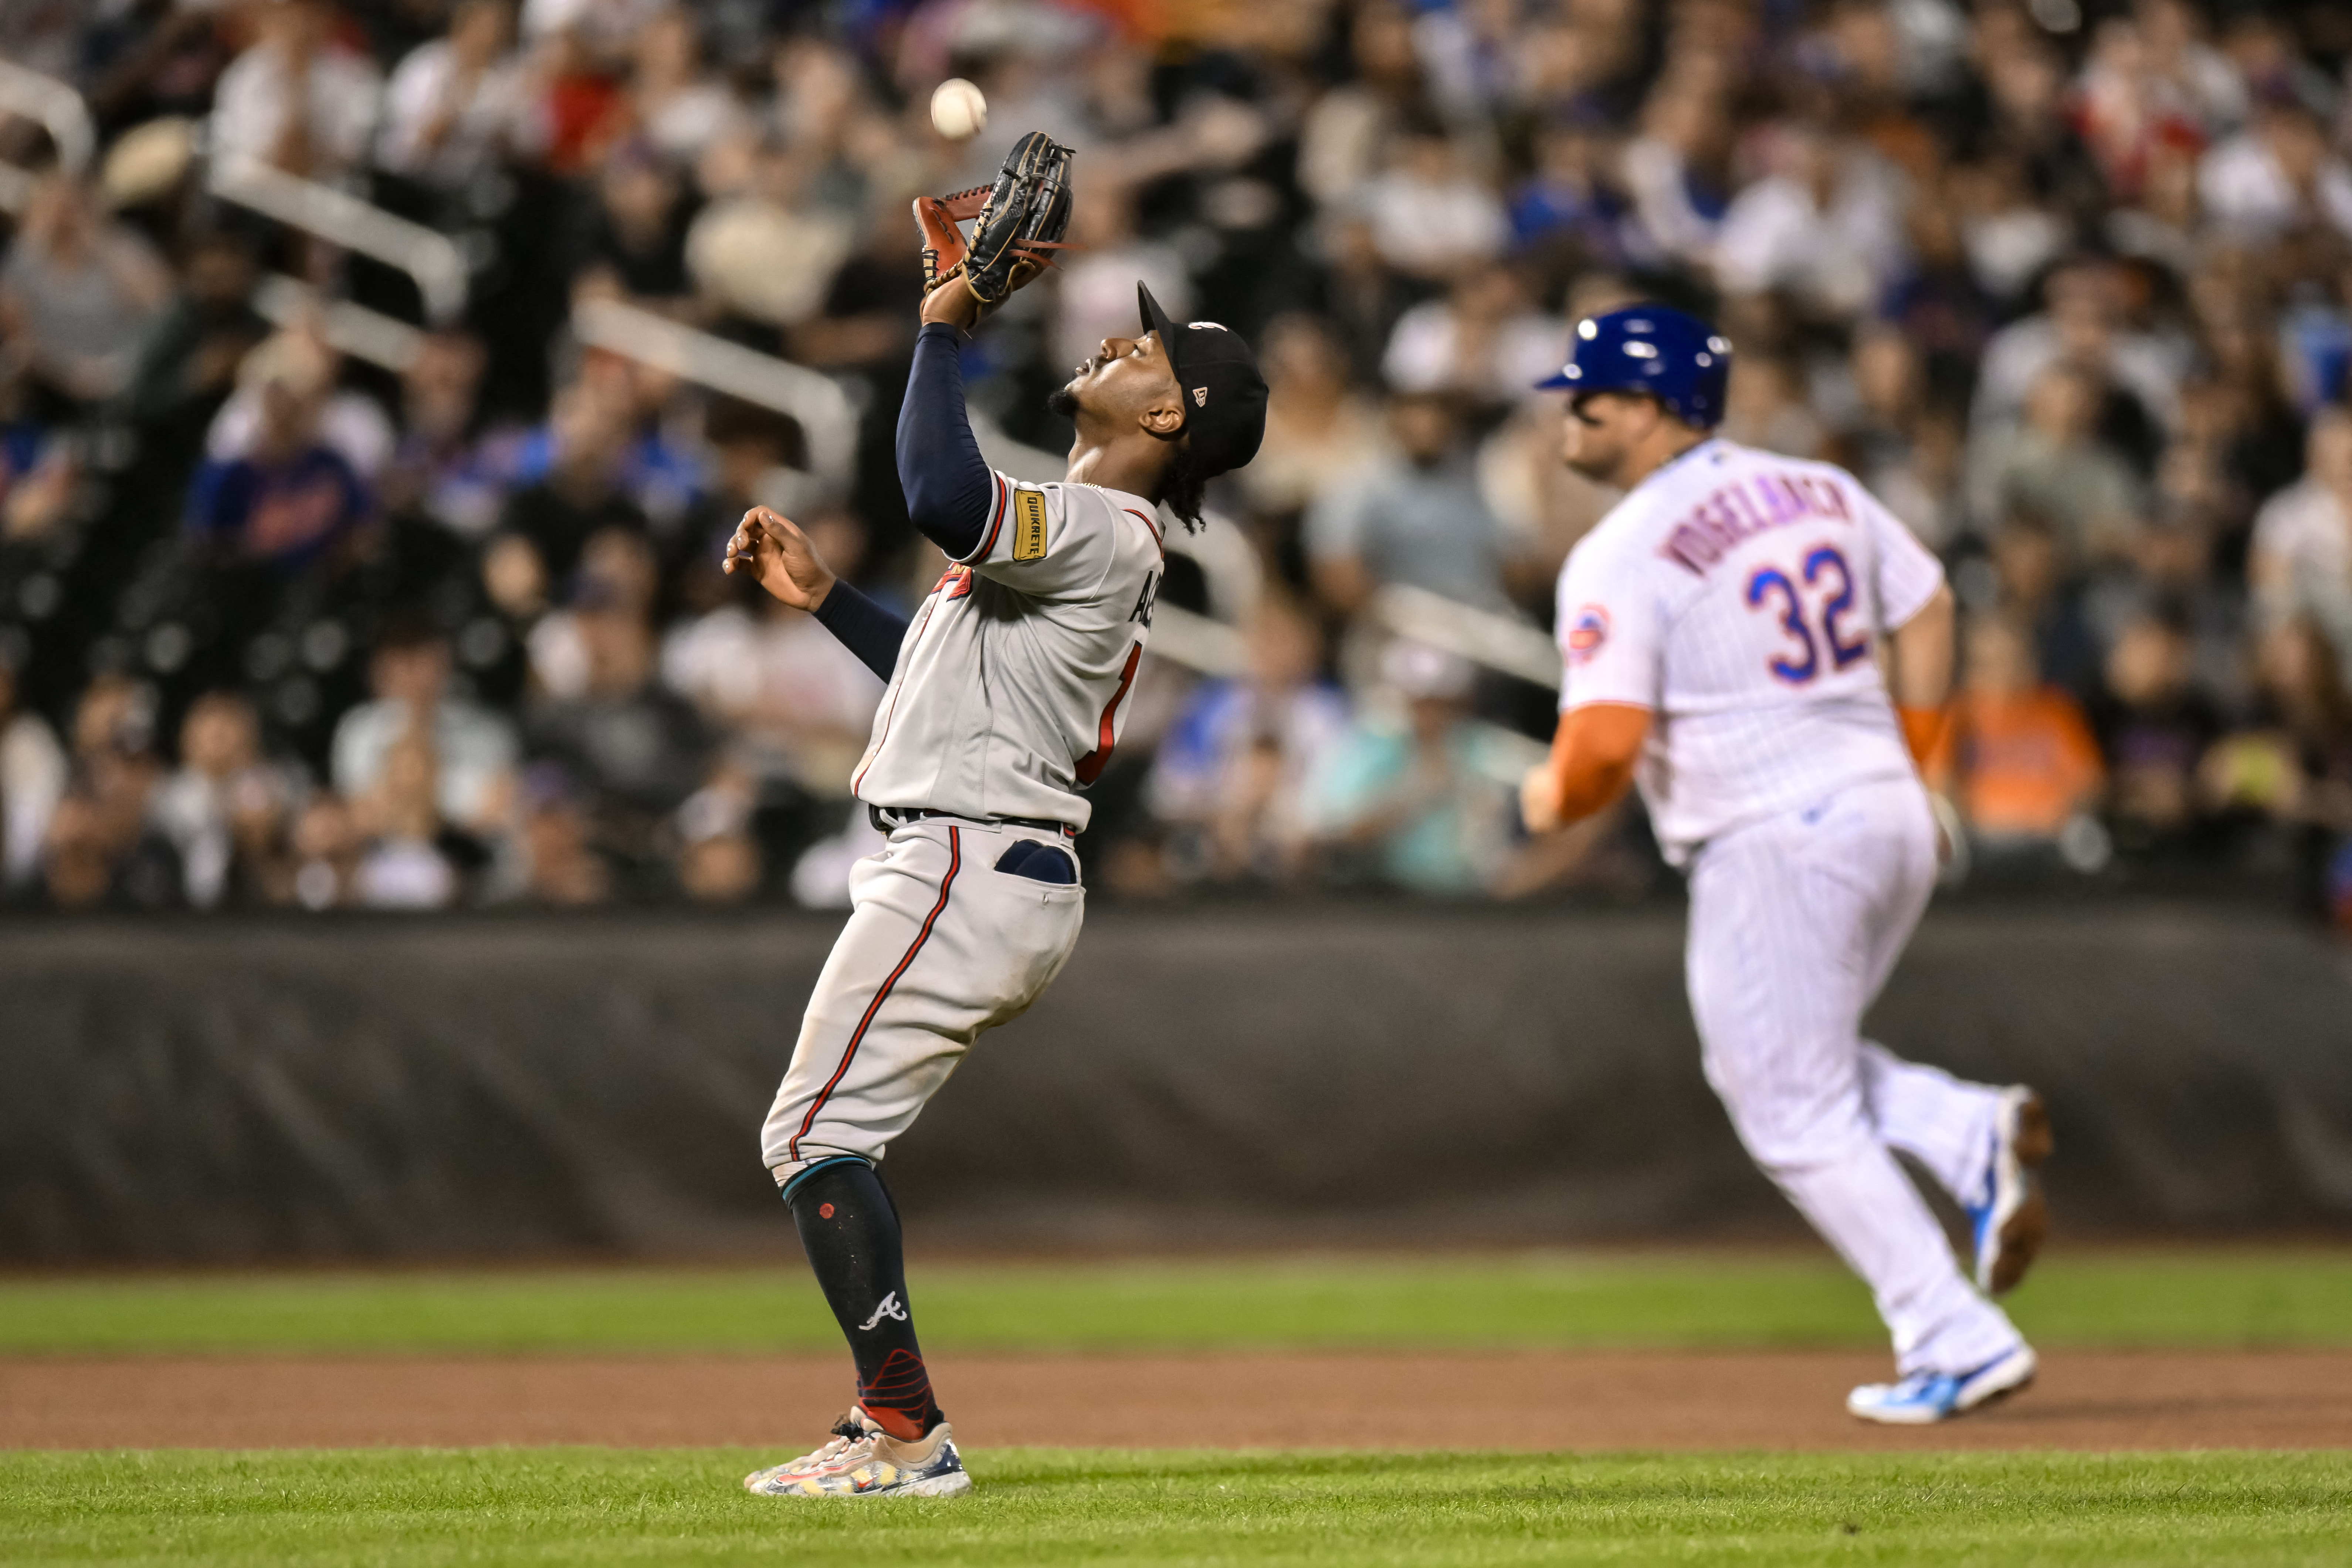 Strider works 7 scoreless innings as the Braves complete lopsided  doubleheader sweep of Mets - The San Diego Union-Tribune